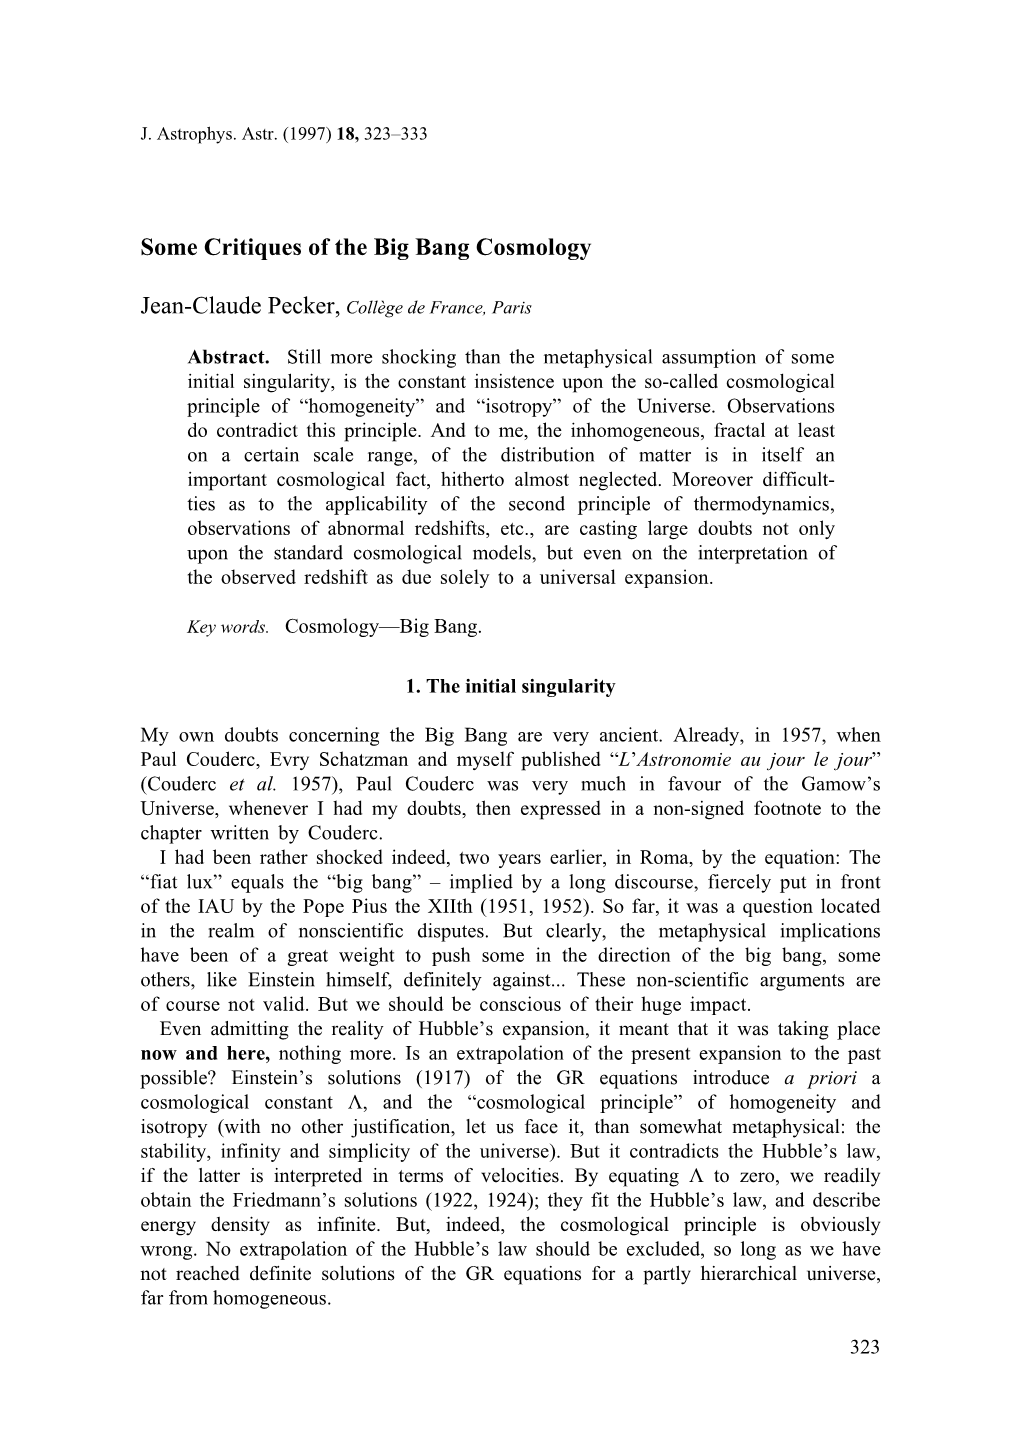 Some Critiques of the Big Bang Cosmology